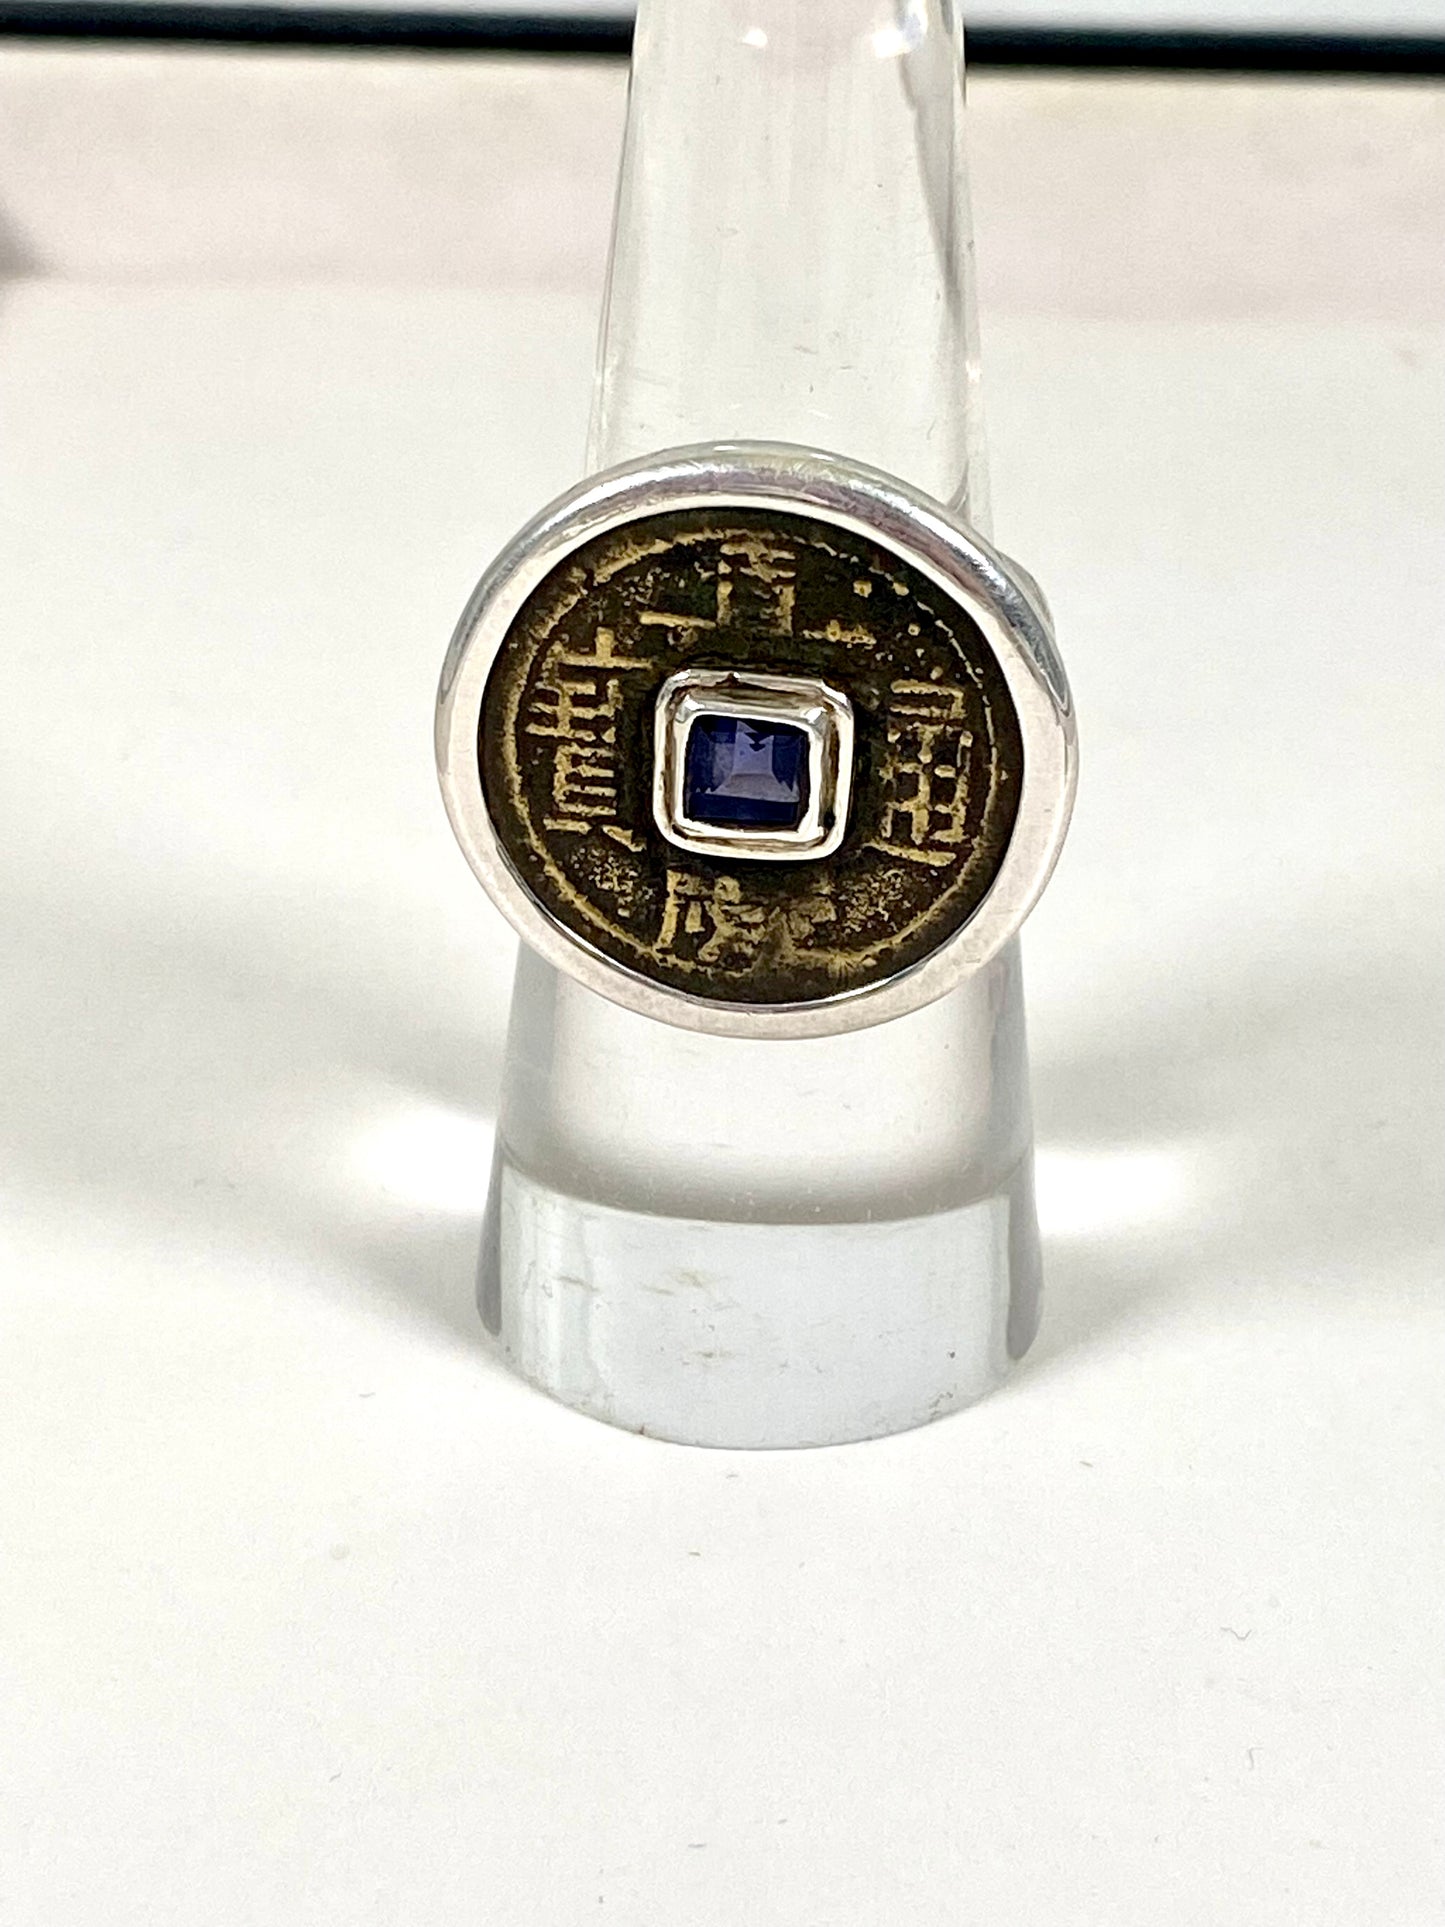 Antique Qing Dynasty Jia Qing Reign (1796-1820) Cash Coin Ring in Sterling Silver w Amethyst